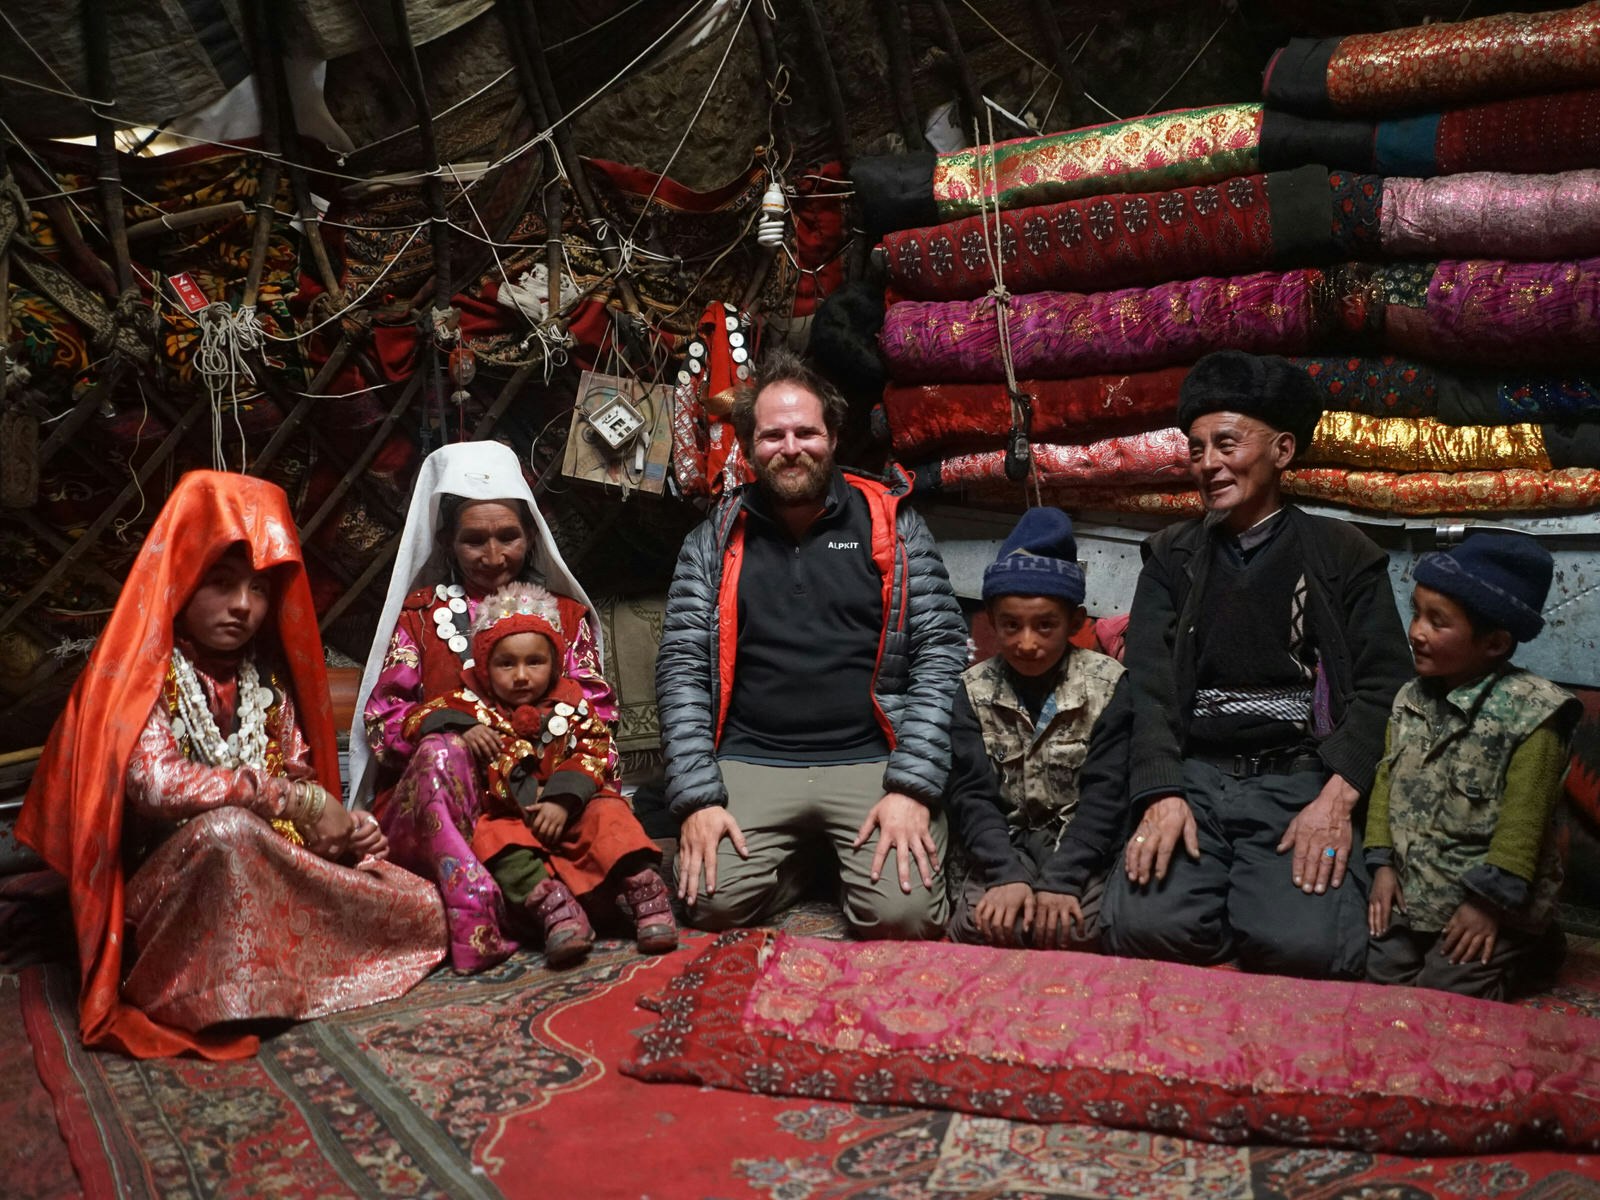 Writer Jonny Duncan kneels with a Kyrgyz nomad family inside their yurt, which is draped with red textiles and carpets